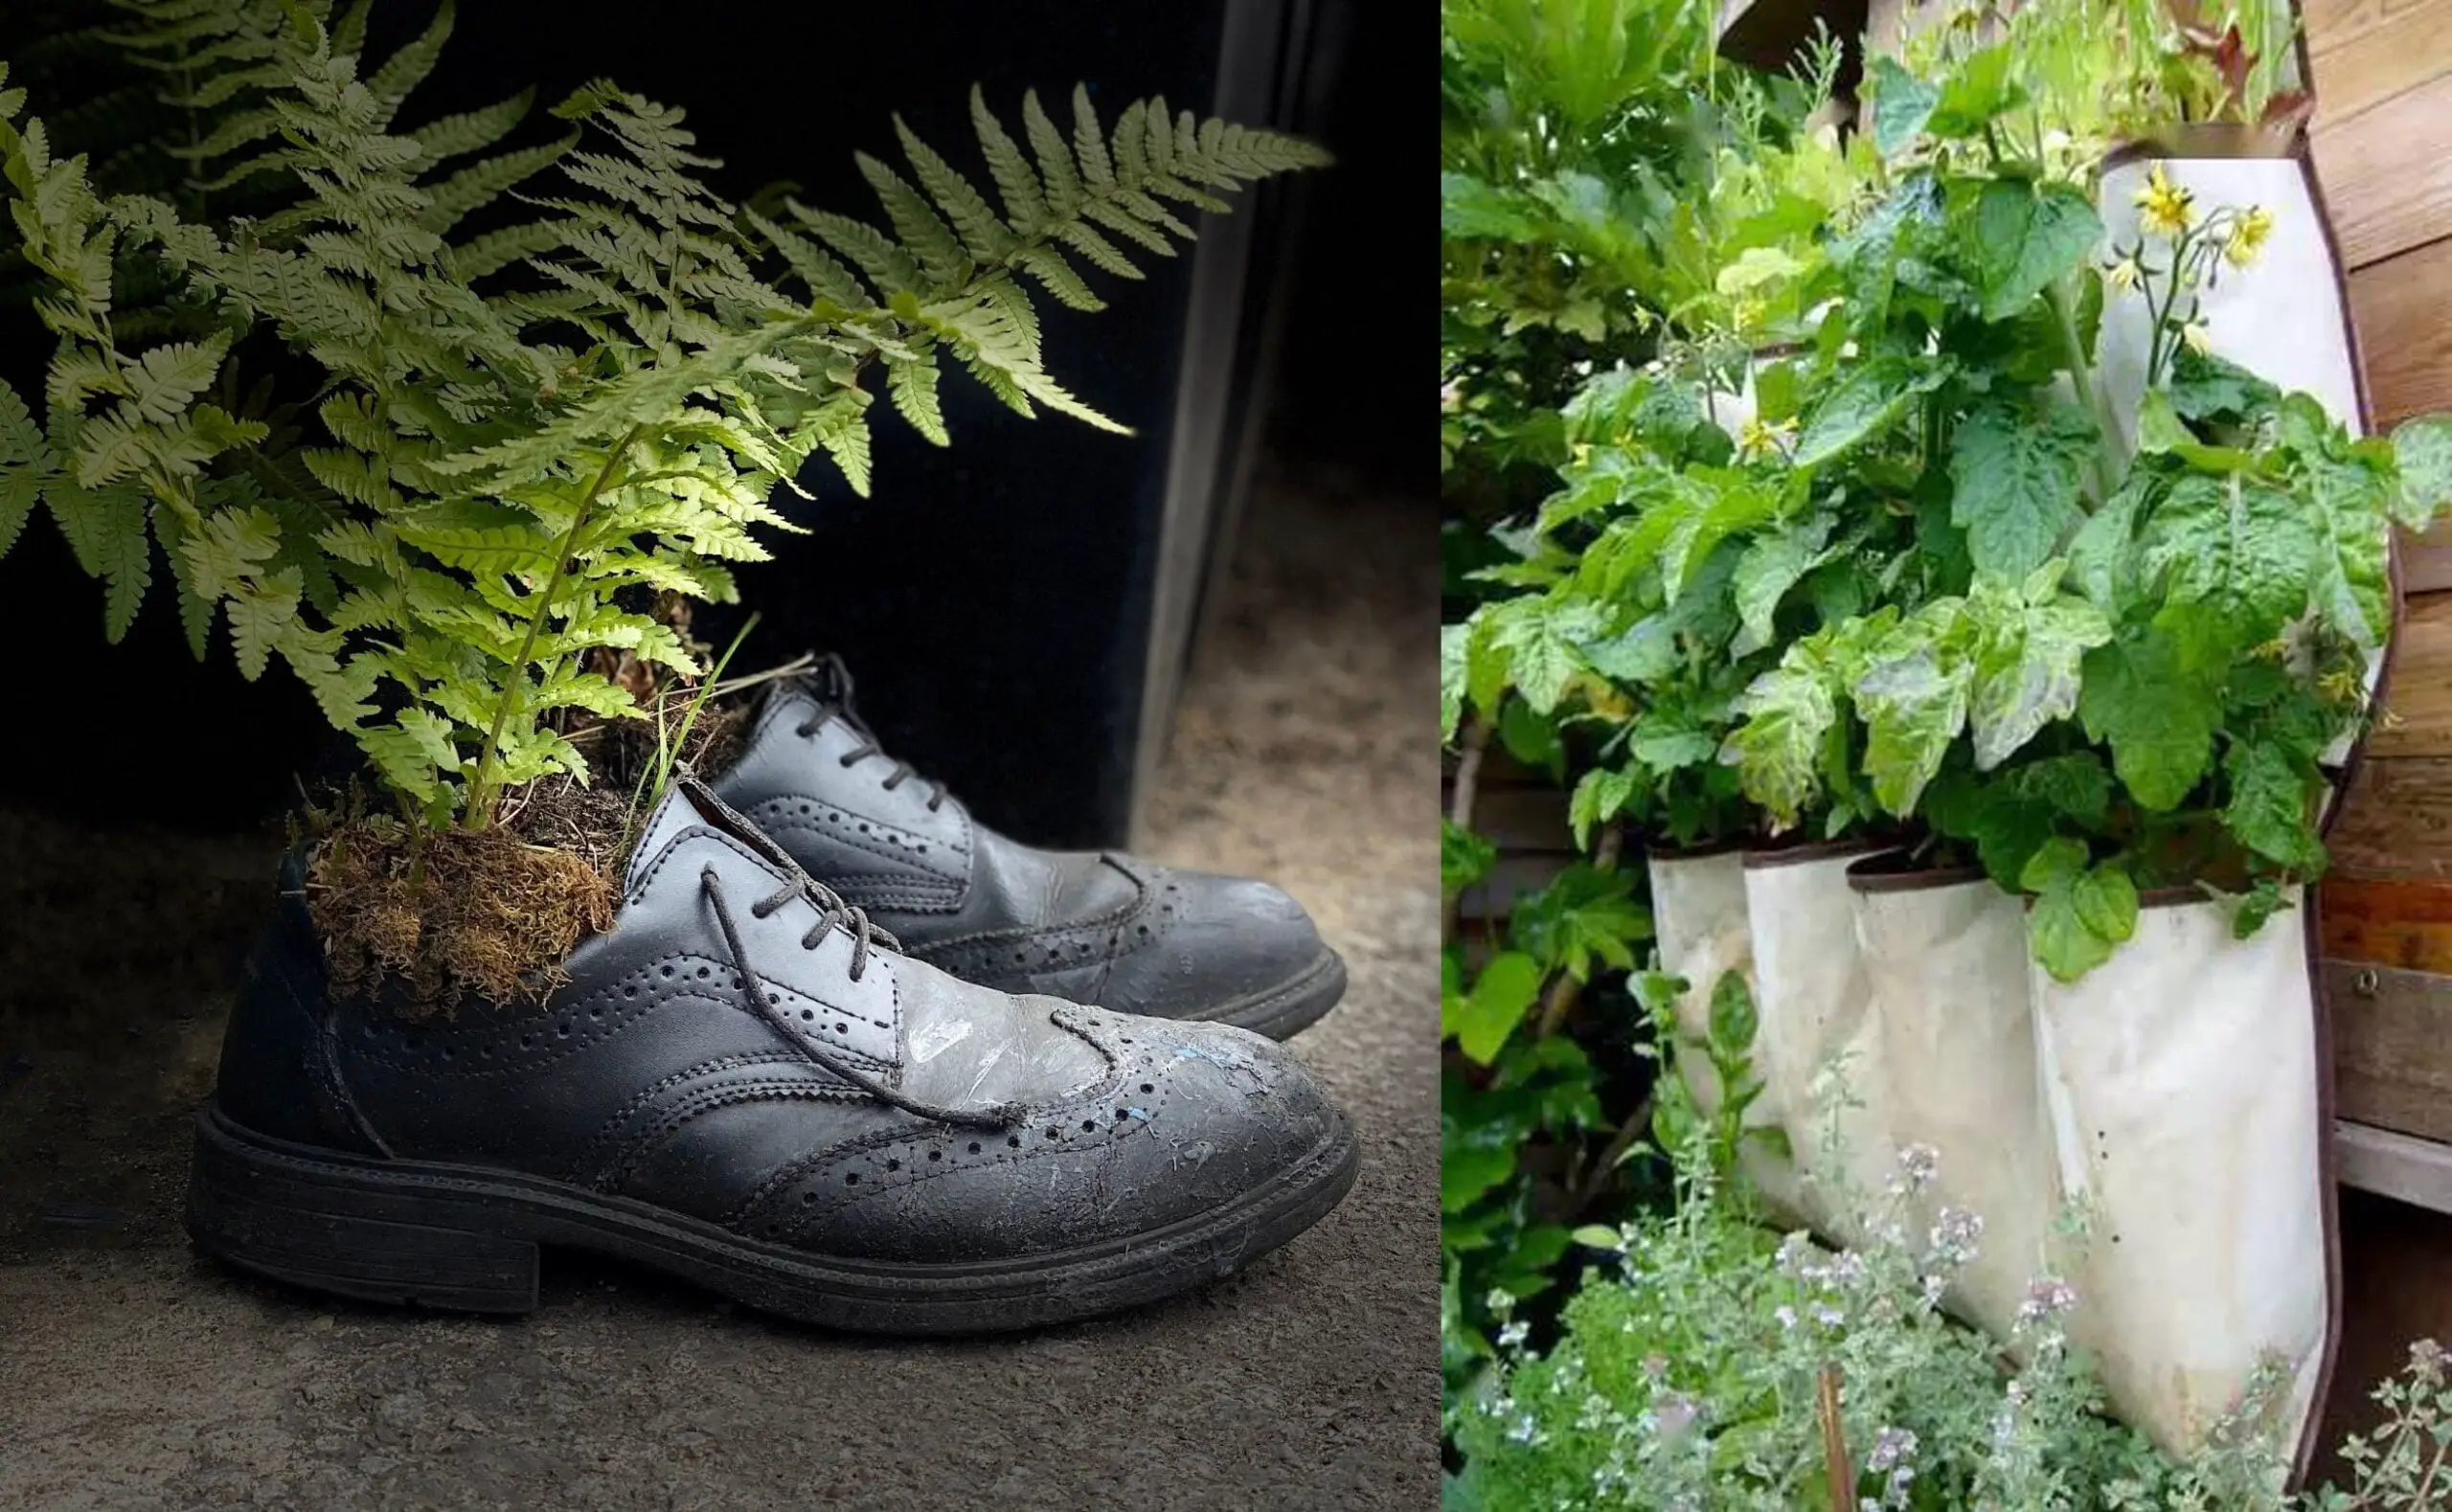 Old shoes and bags as flower pots